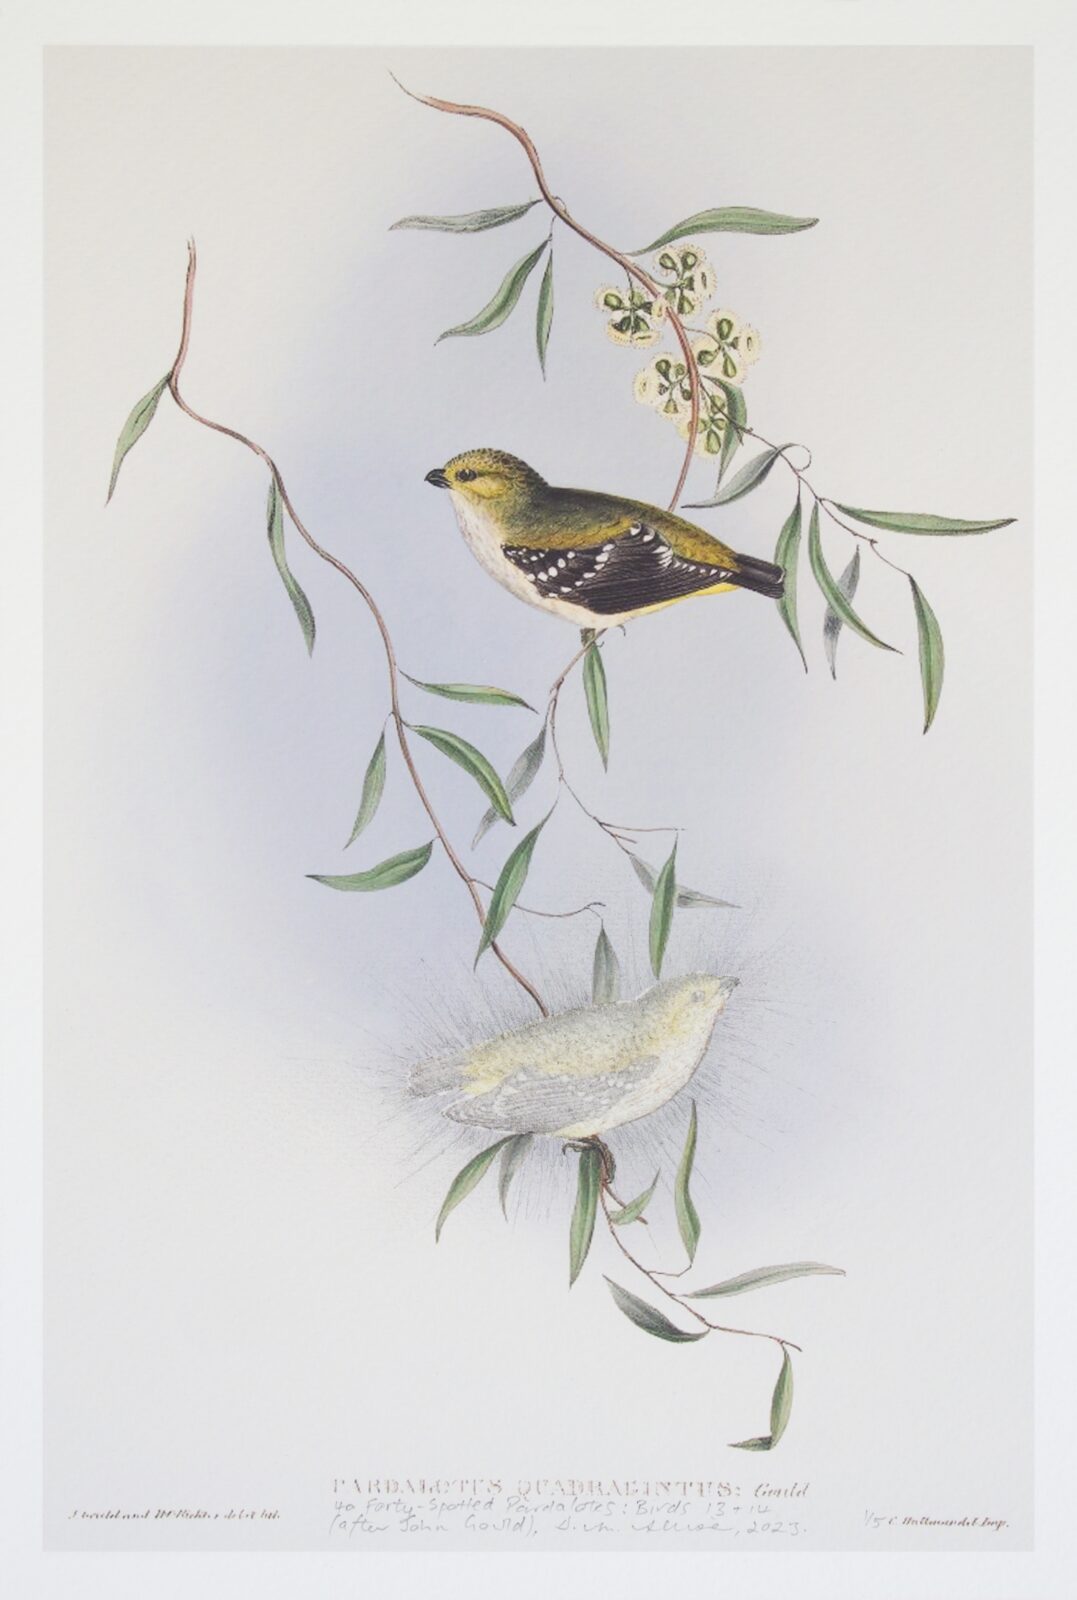 40 Forty-Spotted Pardalotes Birds 13 & 14 (after John Gould)